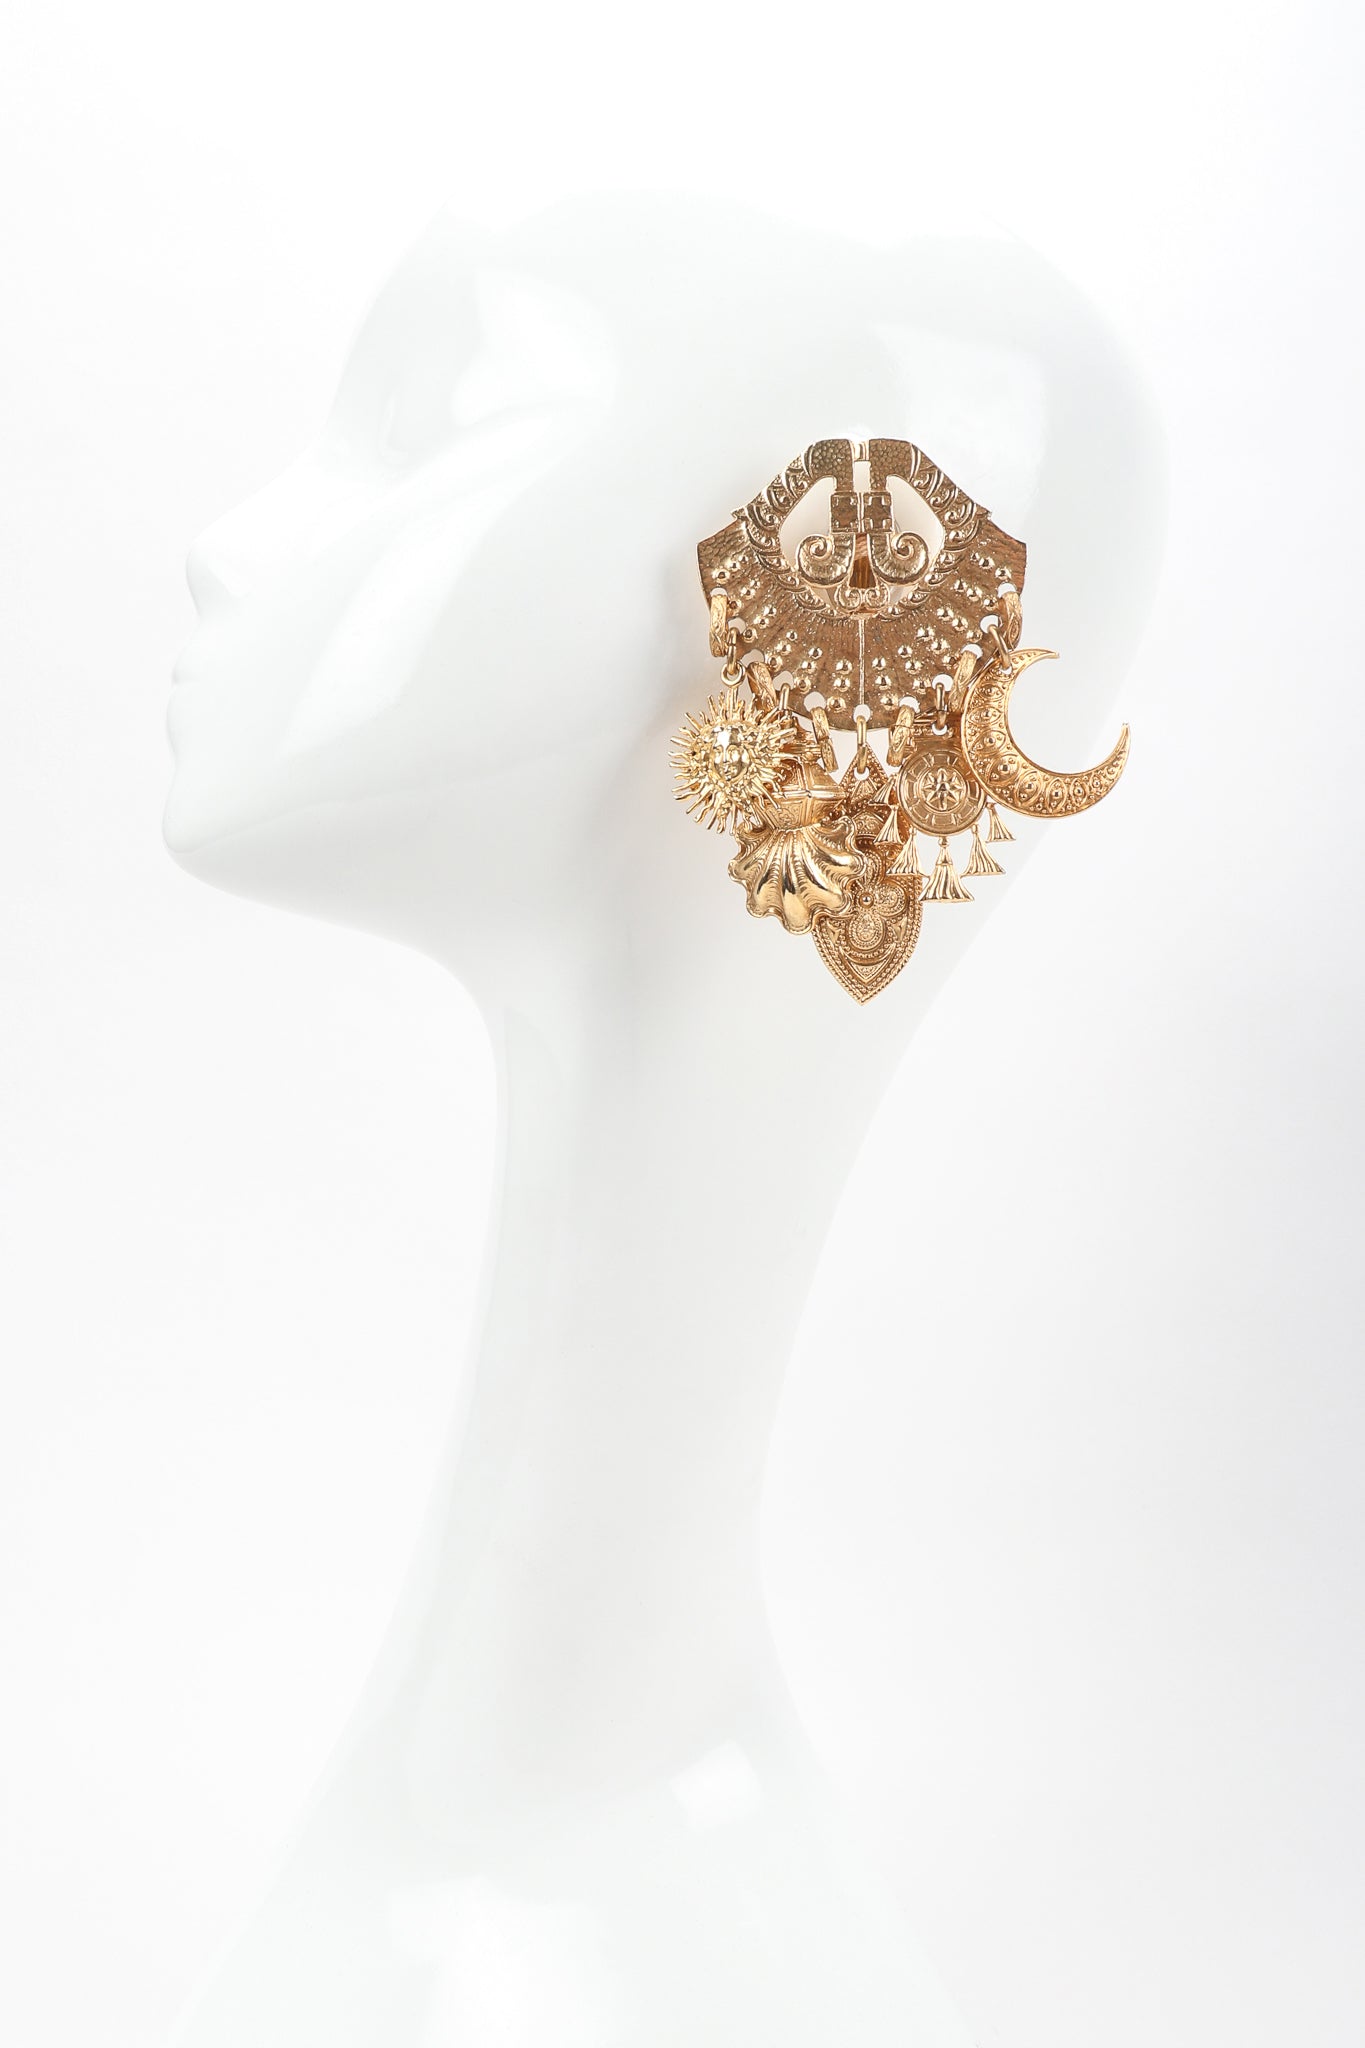 Recess Vintage Edouard Rambaud Gold Etruscan Chandelier Earrings on Mannequin